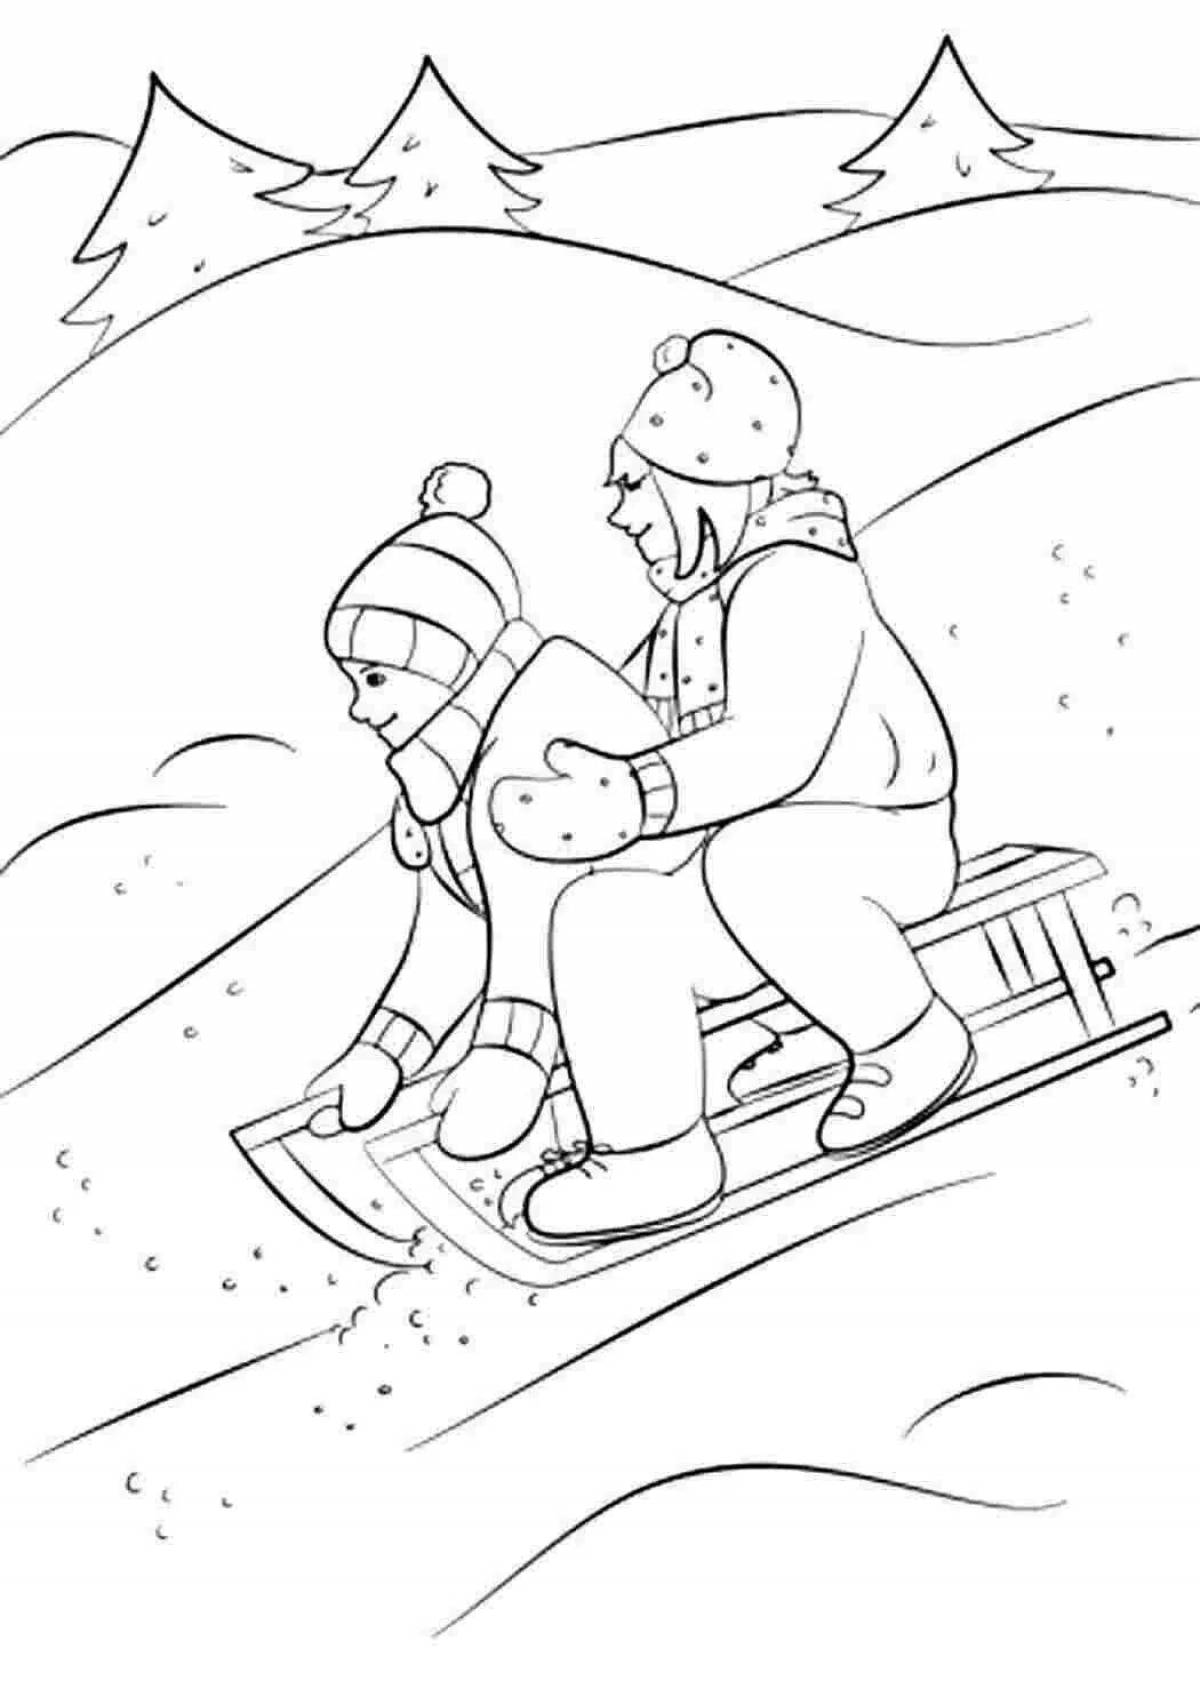 Adorable snow slide coloring page